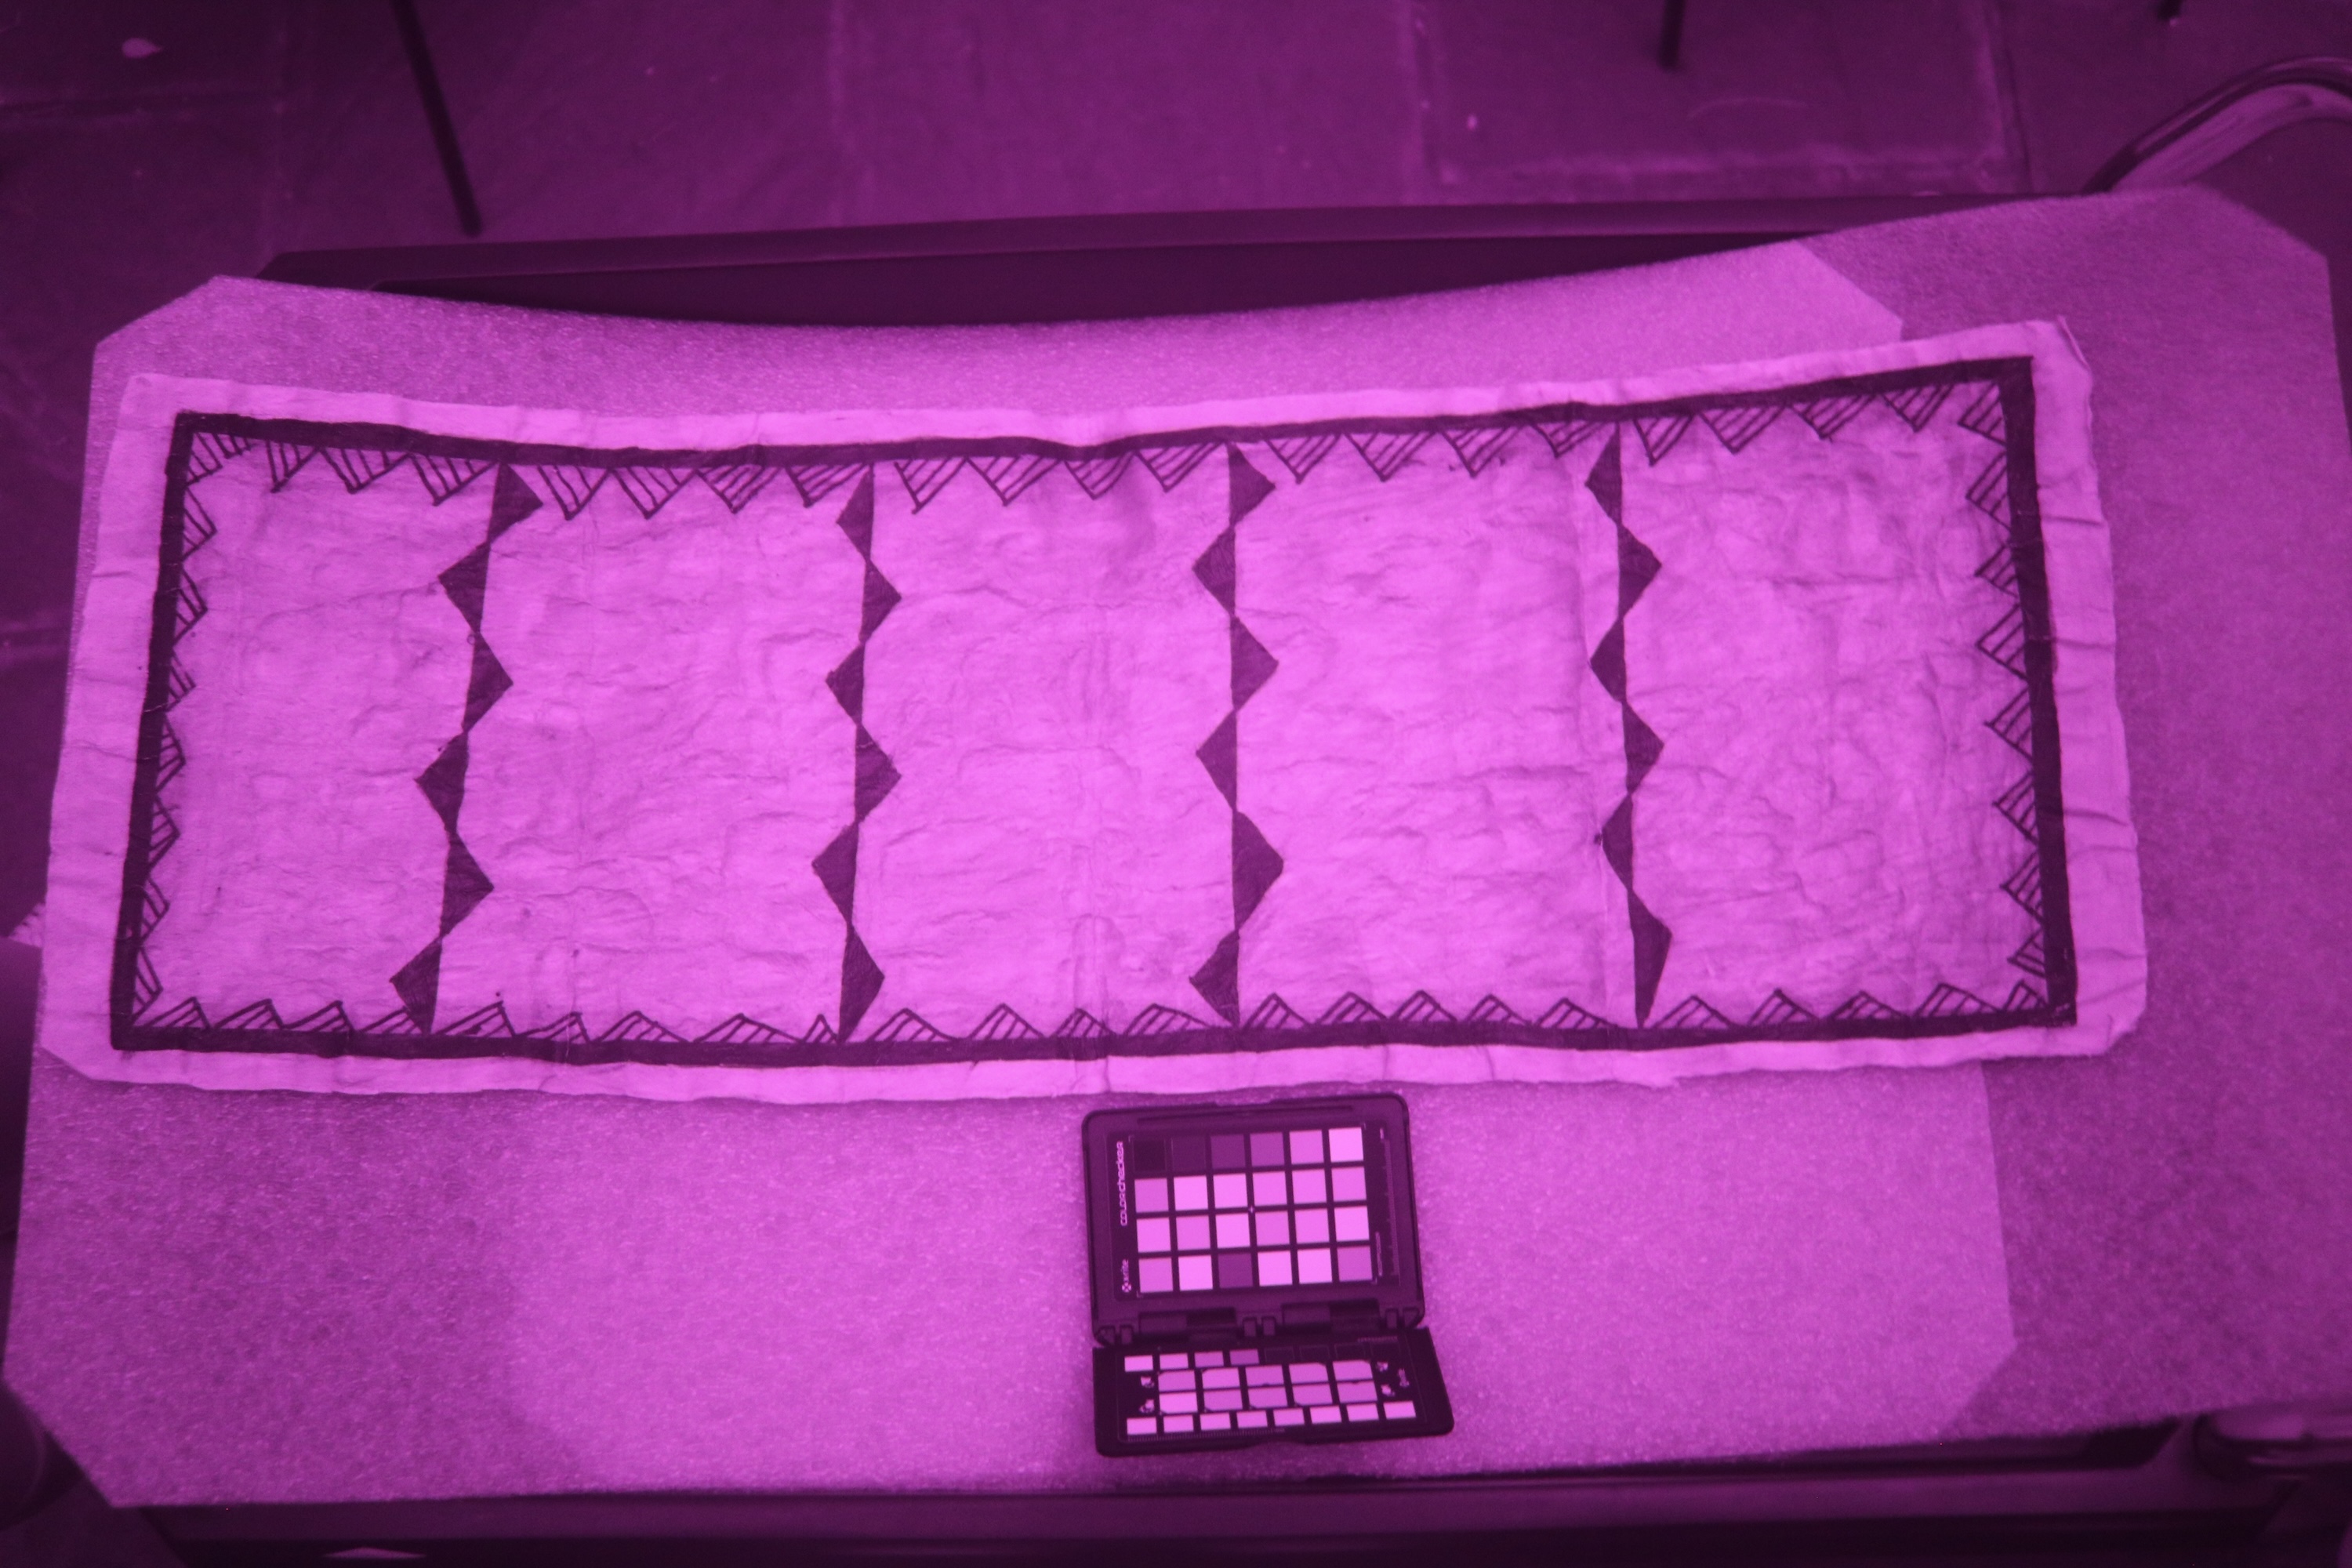 The solid black siapo from before, this time with the underlying geometric design revealed in a purple-tinted infrared photo.